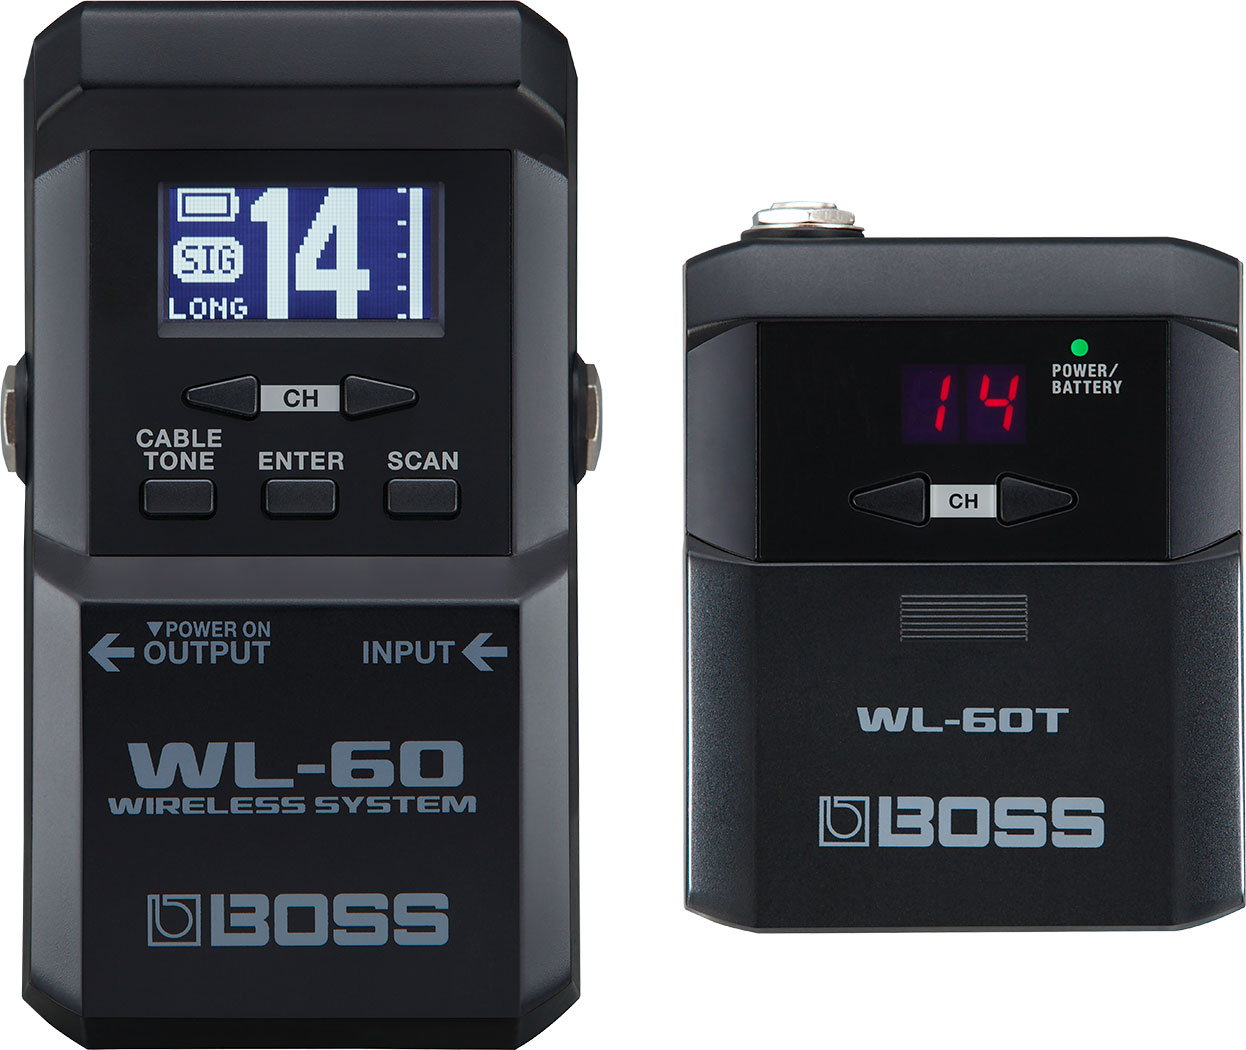 BOSS Wireless Guitar System with Bodypack Transmitter and Stompbox-size Receiver WL-60 